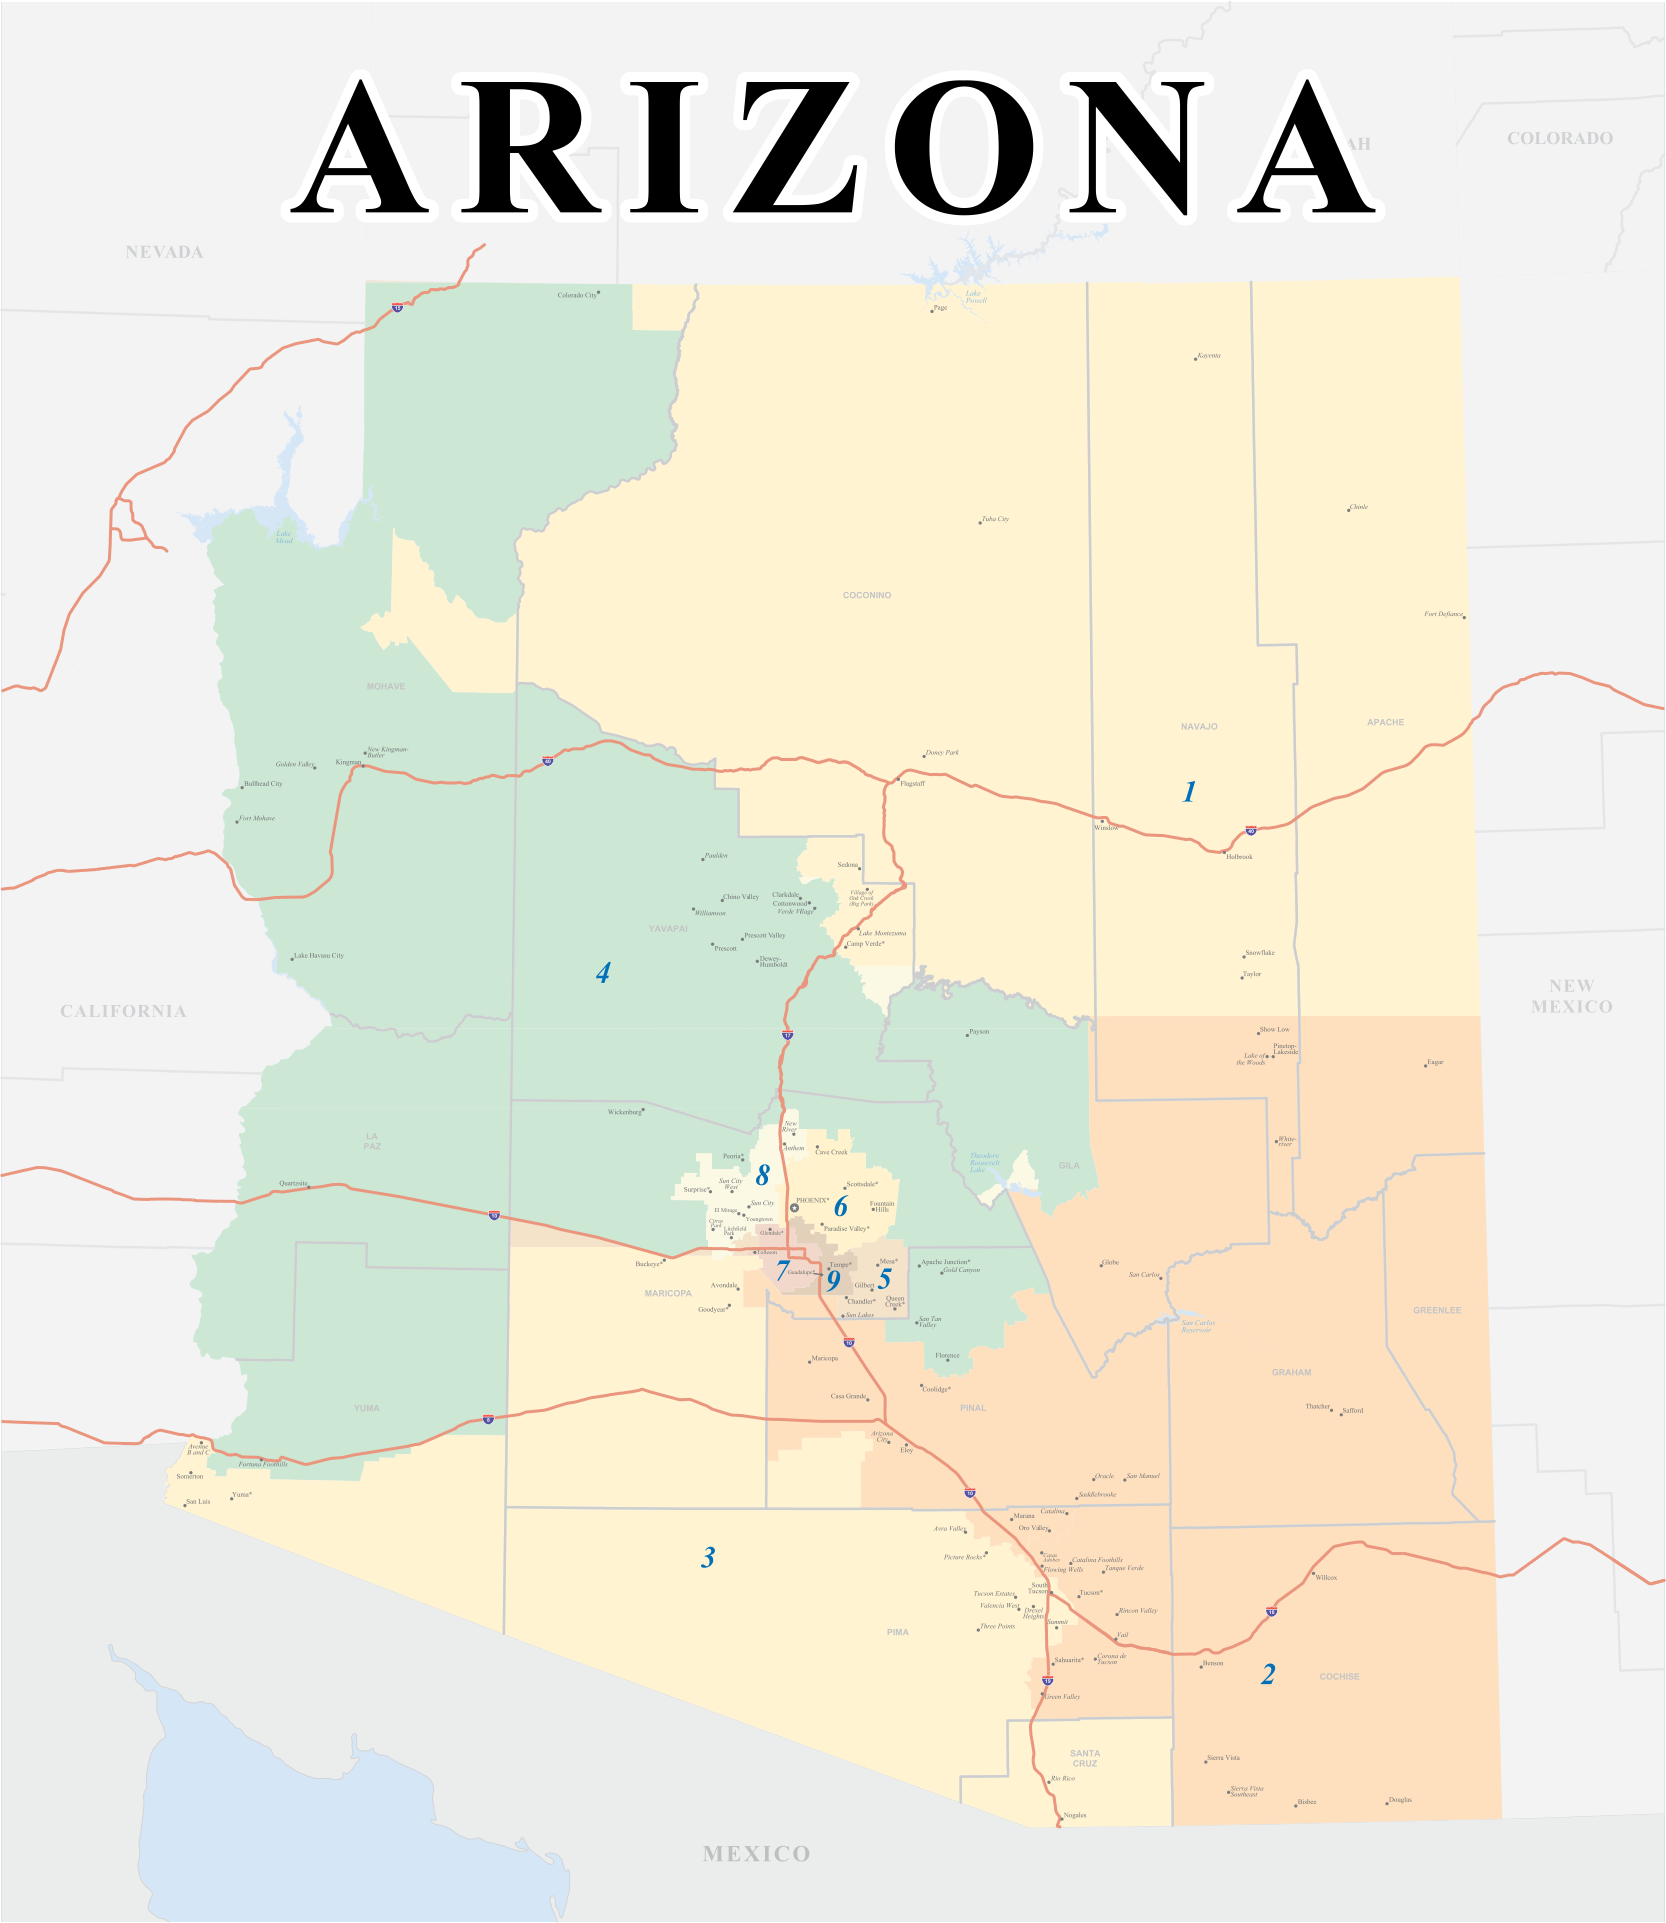 Arizona Road Map with Cities